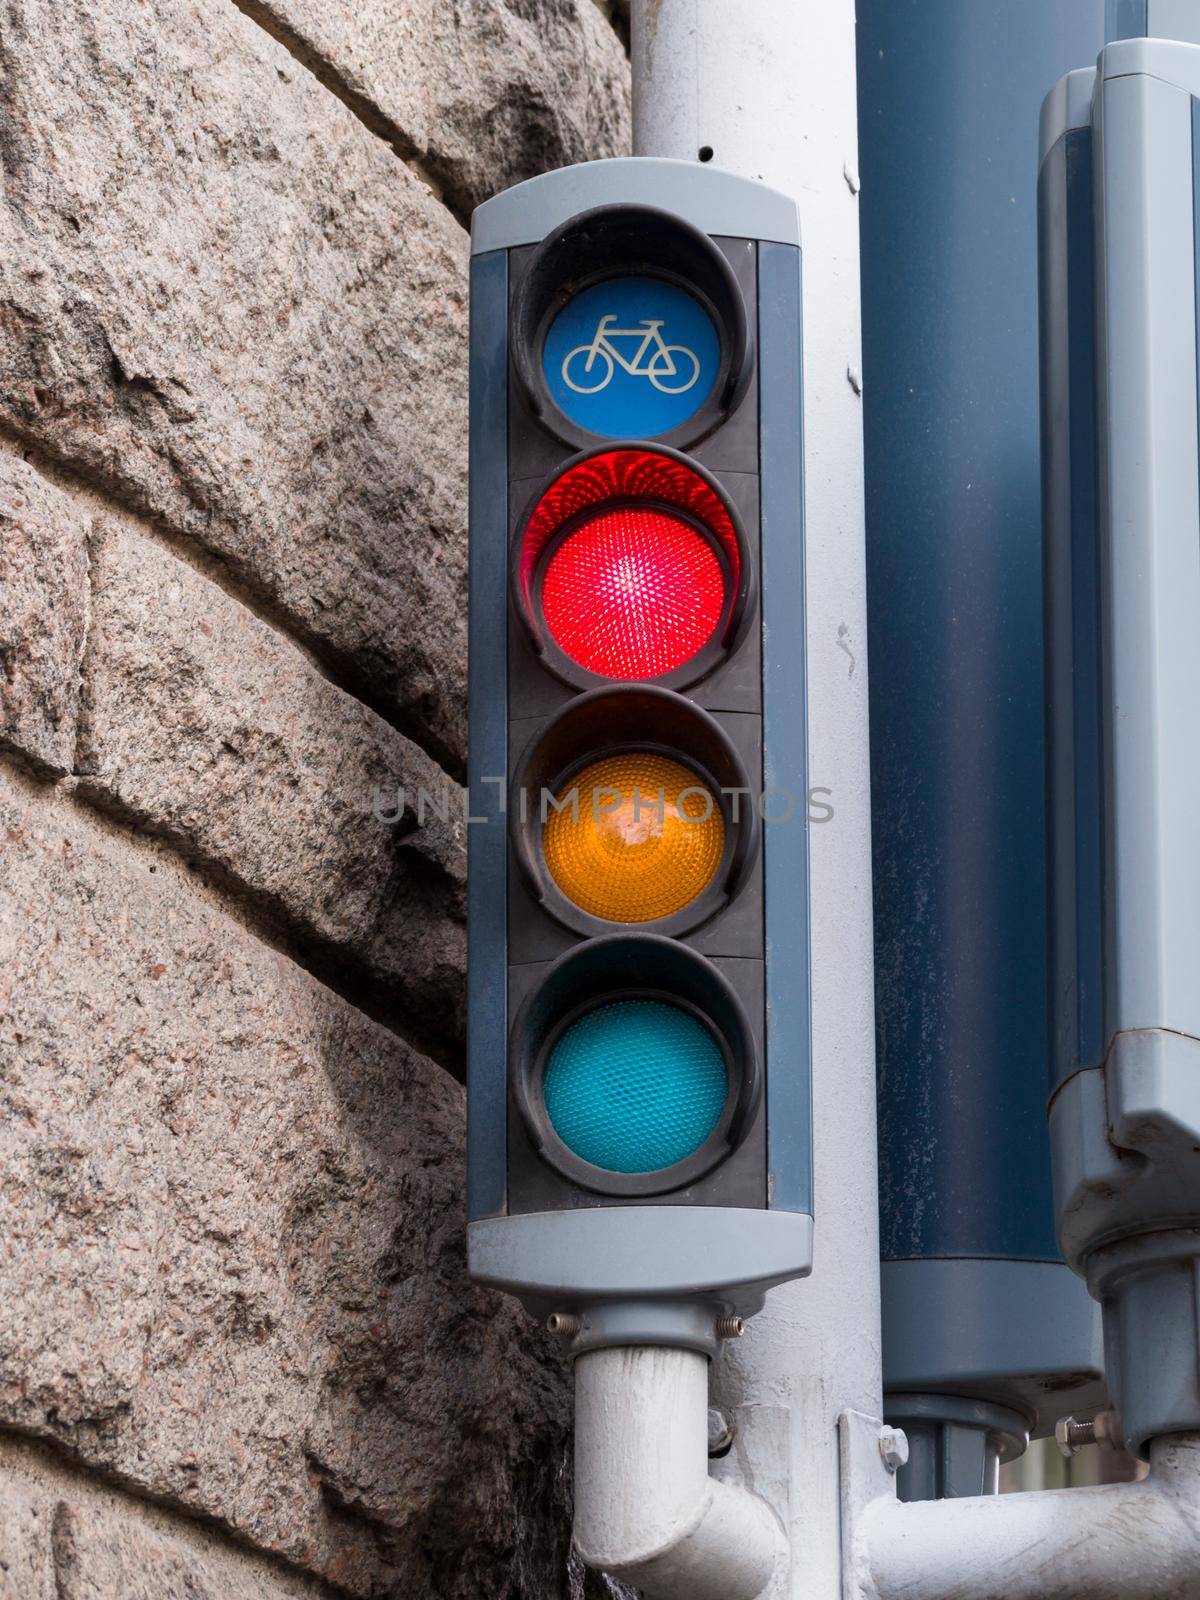 Traffic lights for bicycles. Denmark Malmo